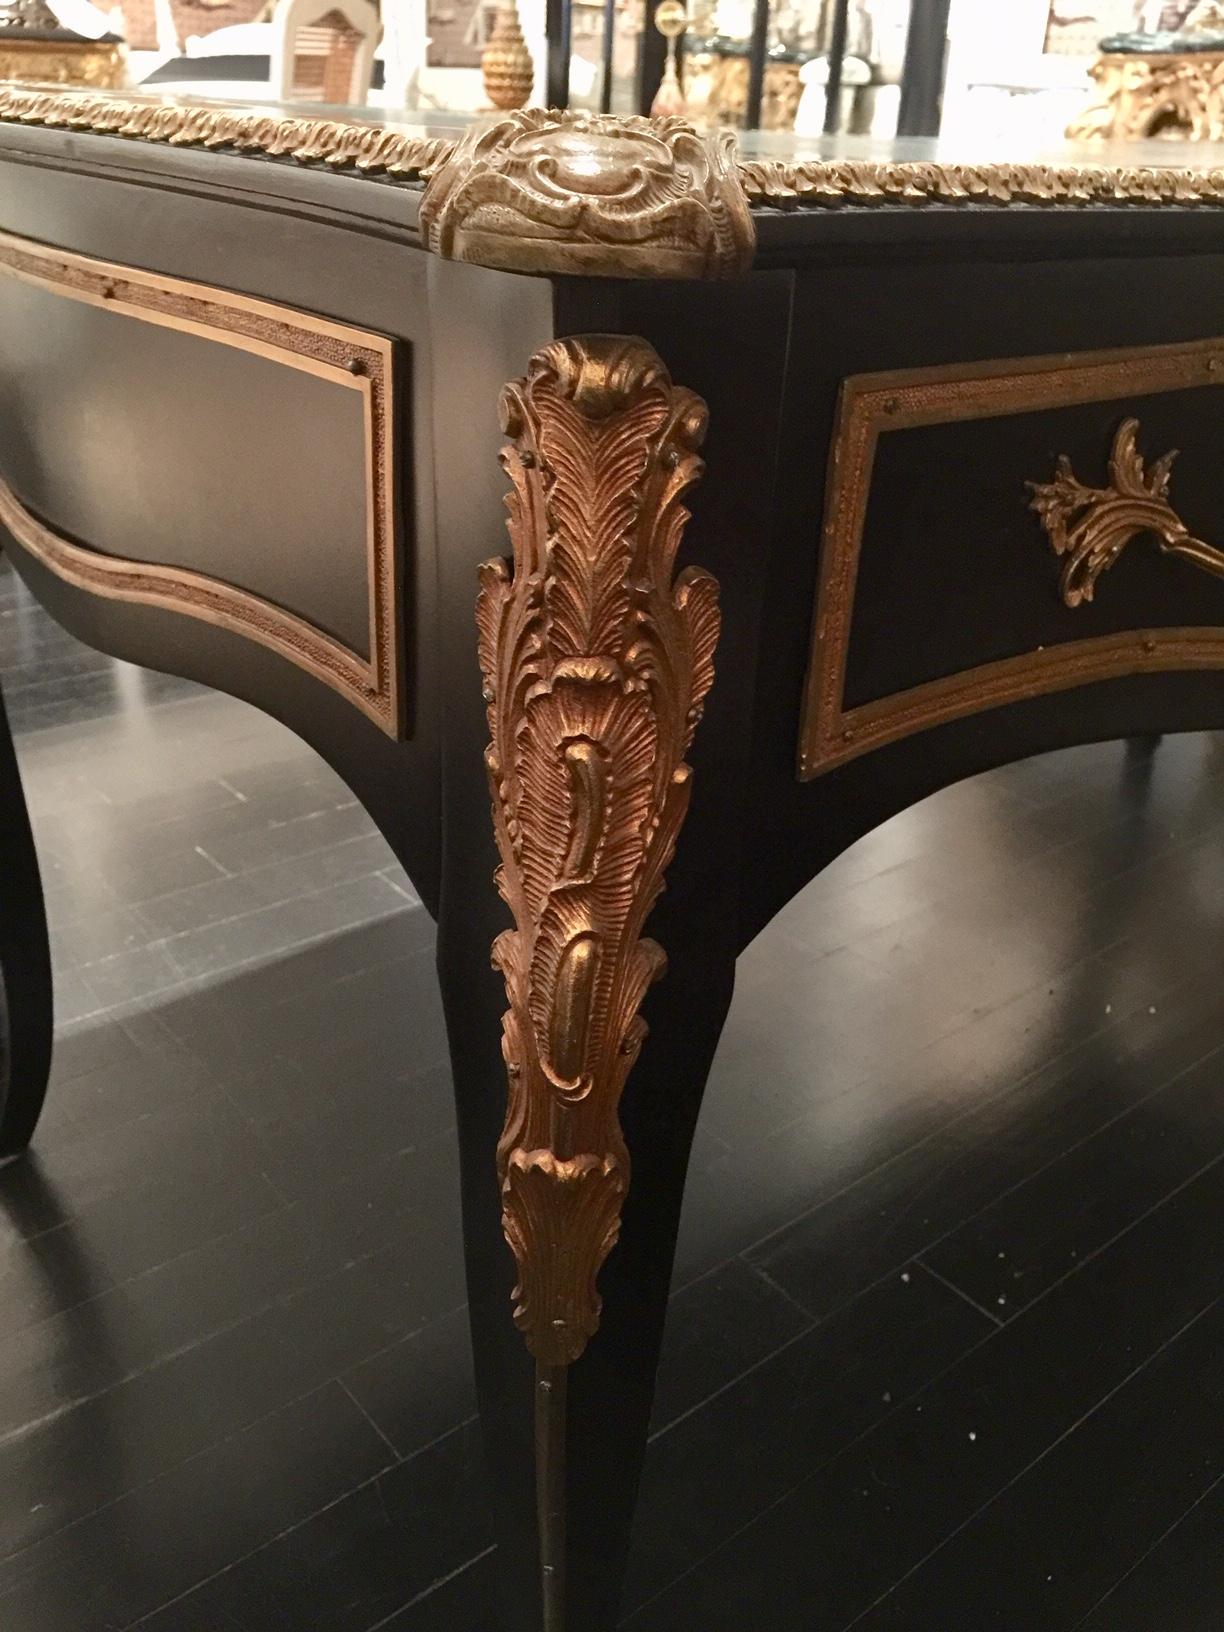 A French Louis XV style ebony and ormelu bureau plat. The desk is raised on elegant cabriole legs dressed in ormelu wraparound sabot and an ormelu band that continues up to a beautiful scrolled plume typical of Louis XV nature references. Each of